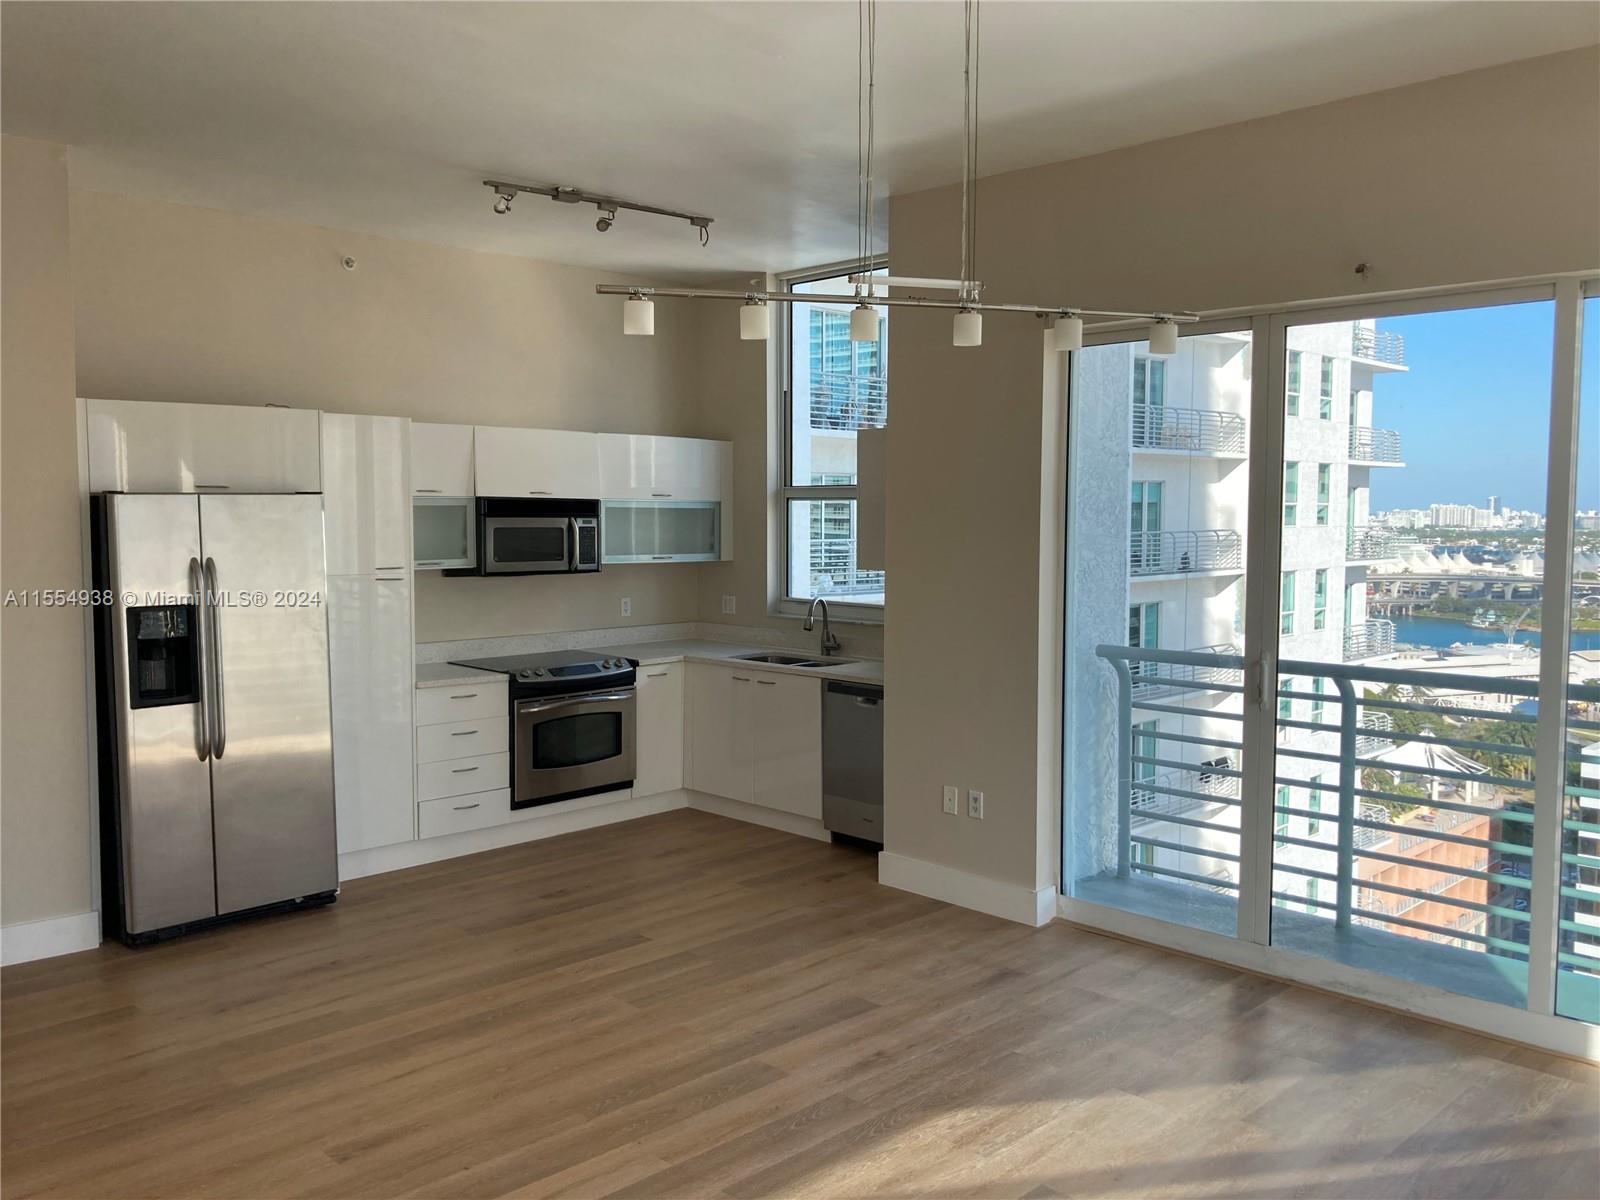 133 NE 2nd Ave #2112 For Sale A11554938, FL